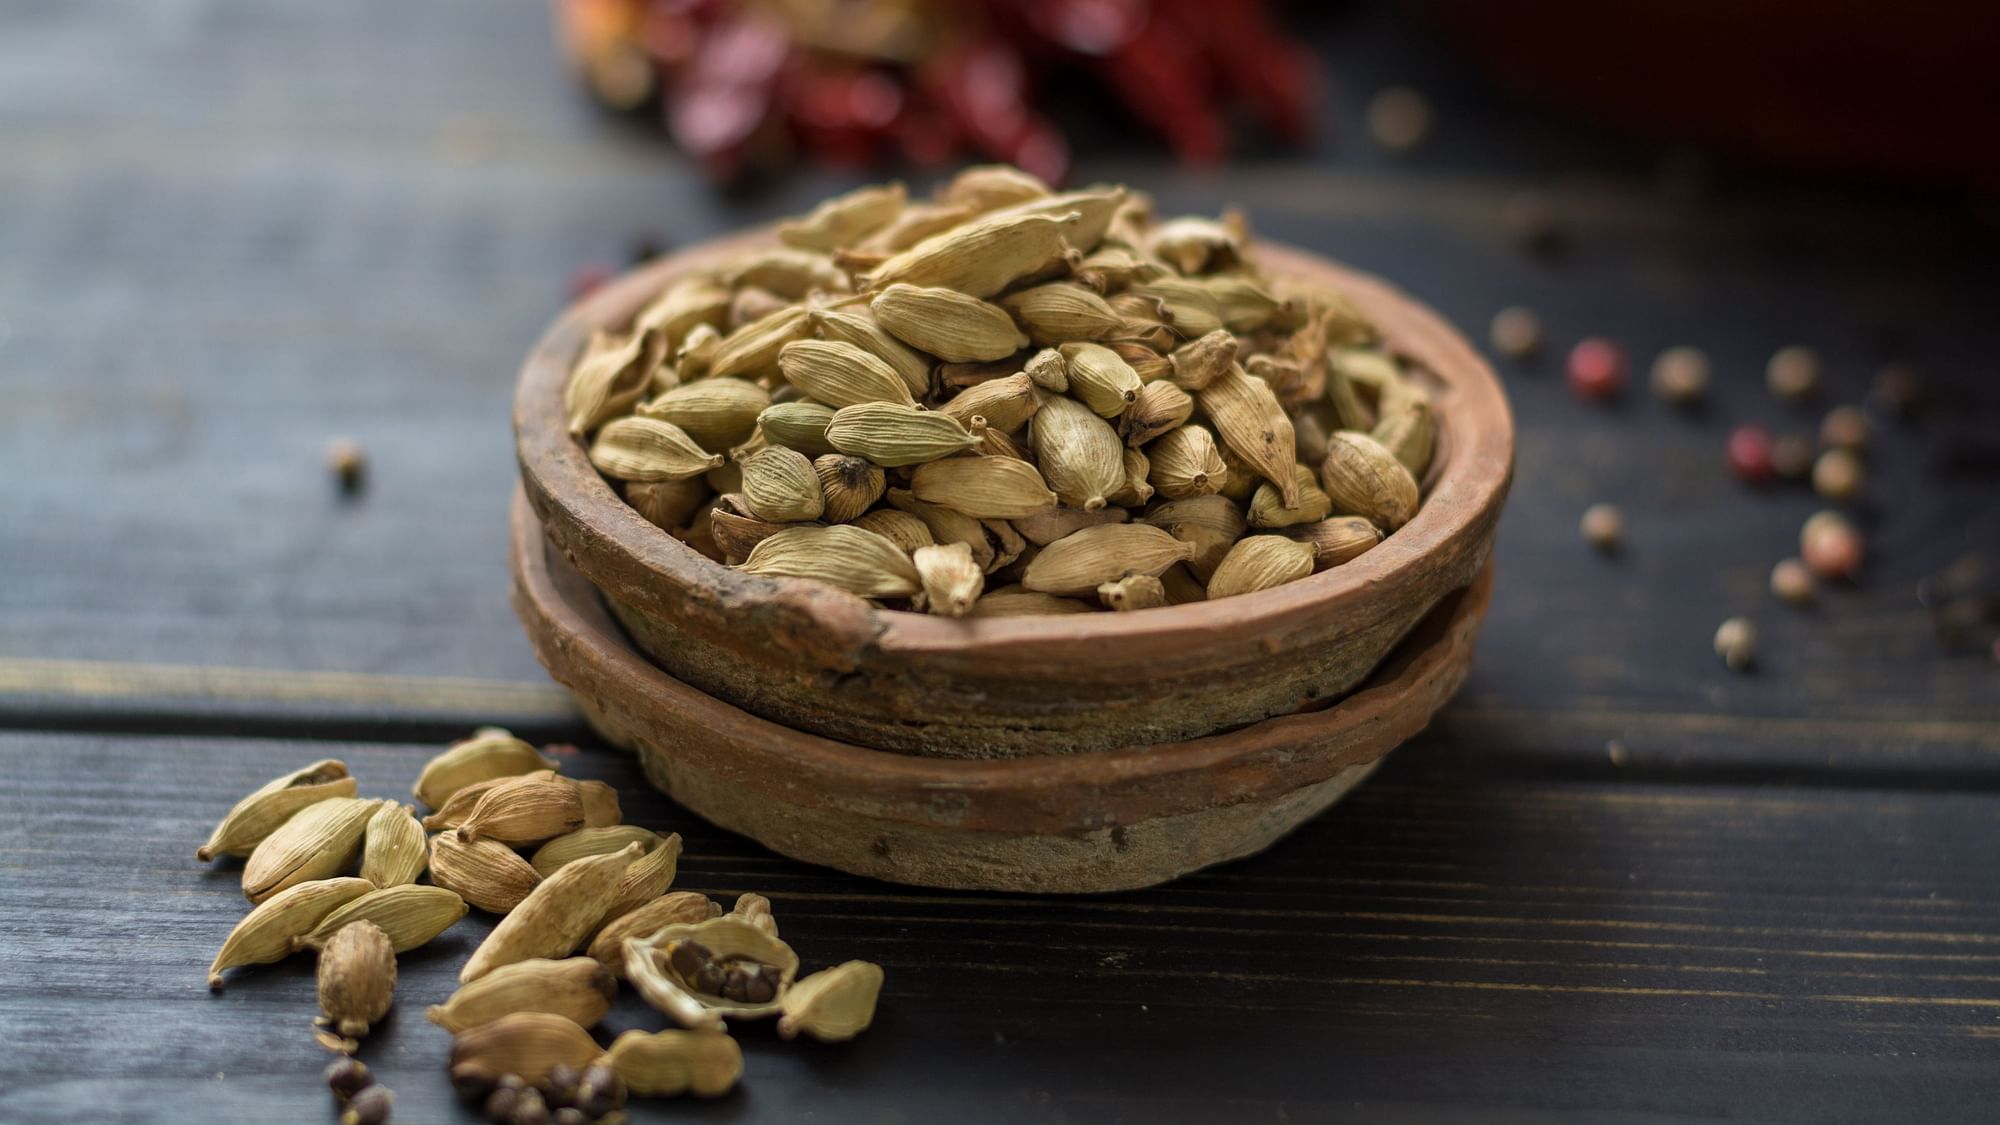 Green cardamoms are smaller and with a more delicate flavour, while the black ones are larger and have a smokier flavour. 